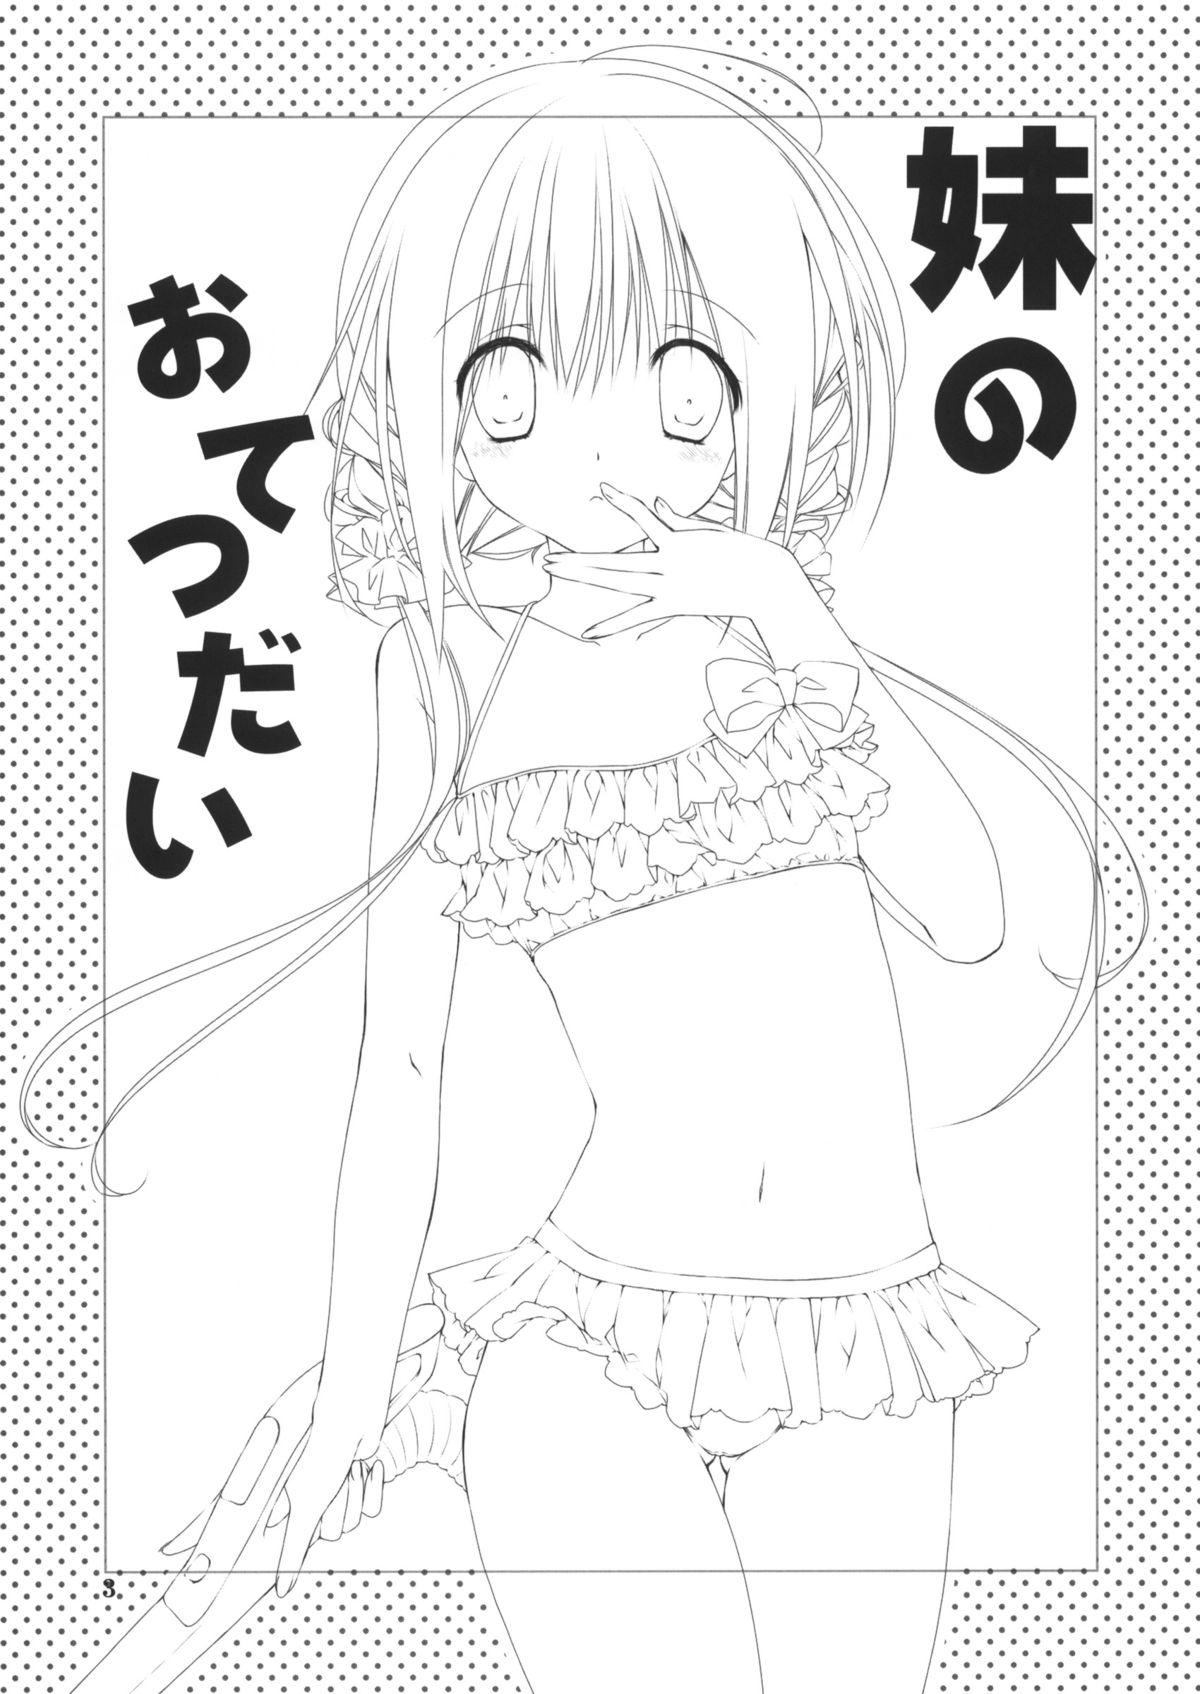 Clothed Imouto no Otetsudai 5 + Paper | Little Sister Helper 5 + Paper Cavala - Page 2